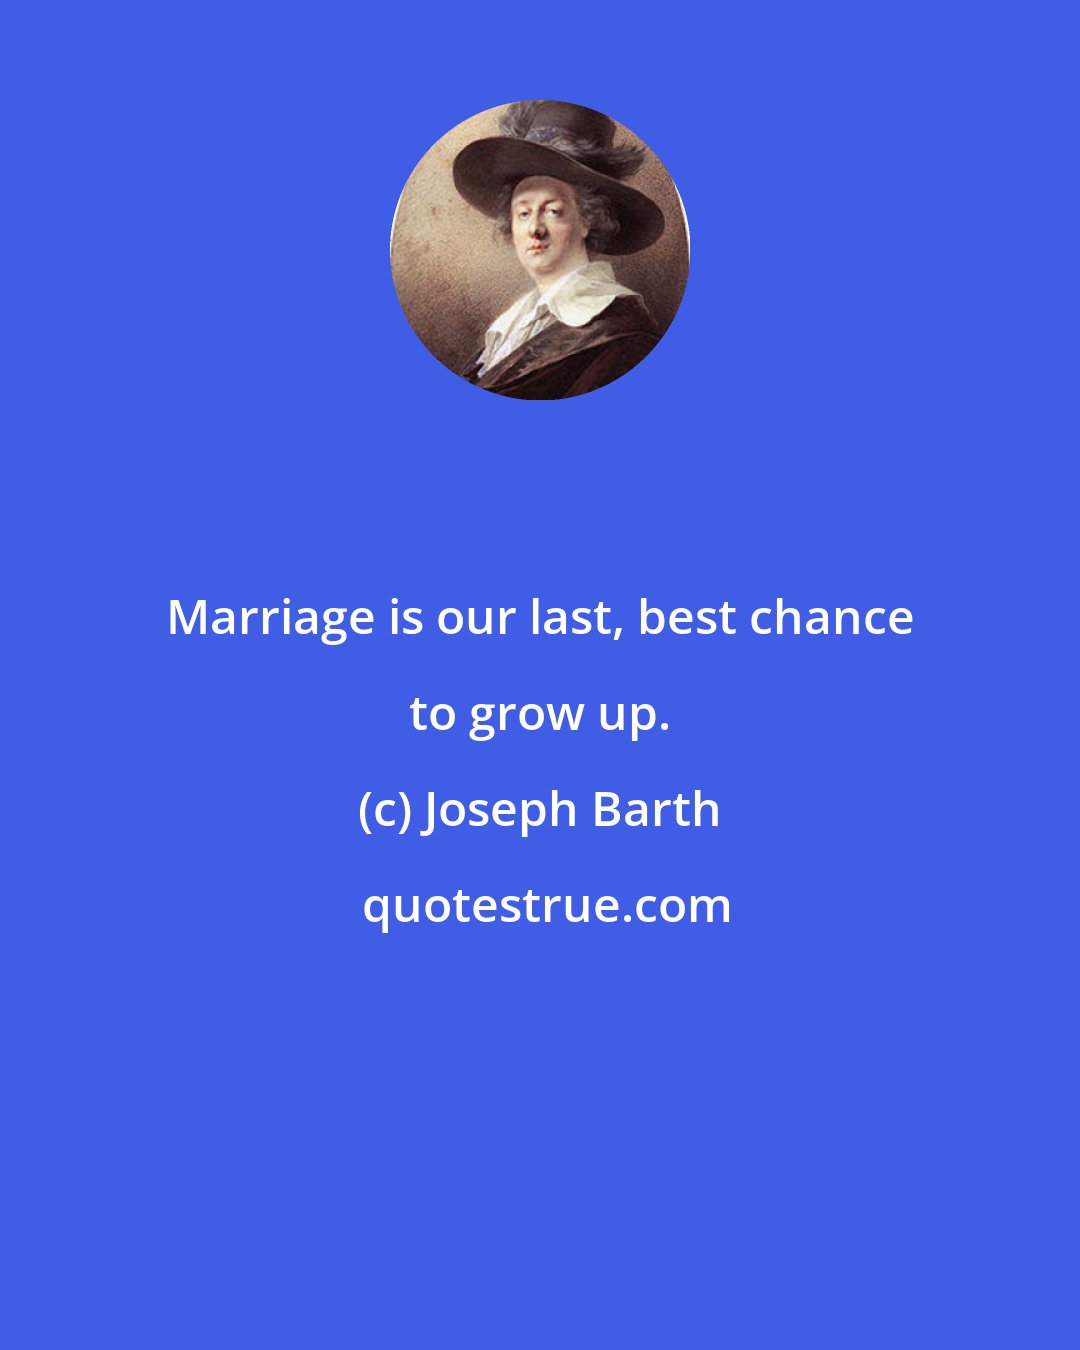 Joseph Barth: Marriage is our last, best chance to grow up.